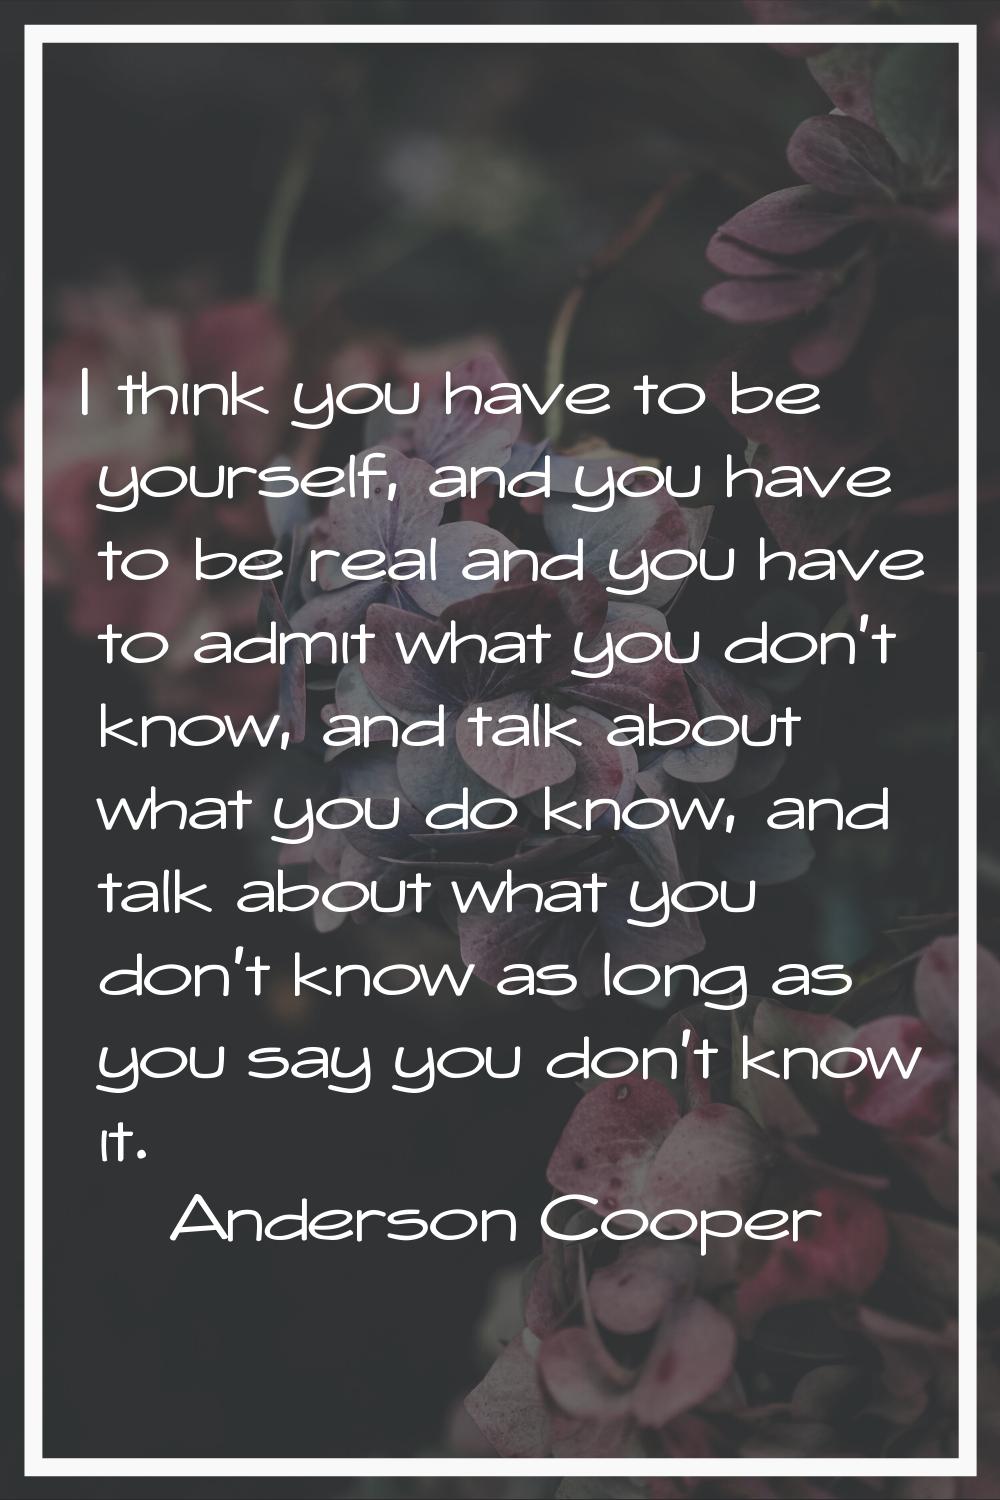 I think you have to be yourself, and you have to be real and you have to admit what you don't know,